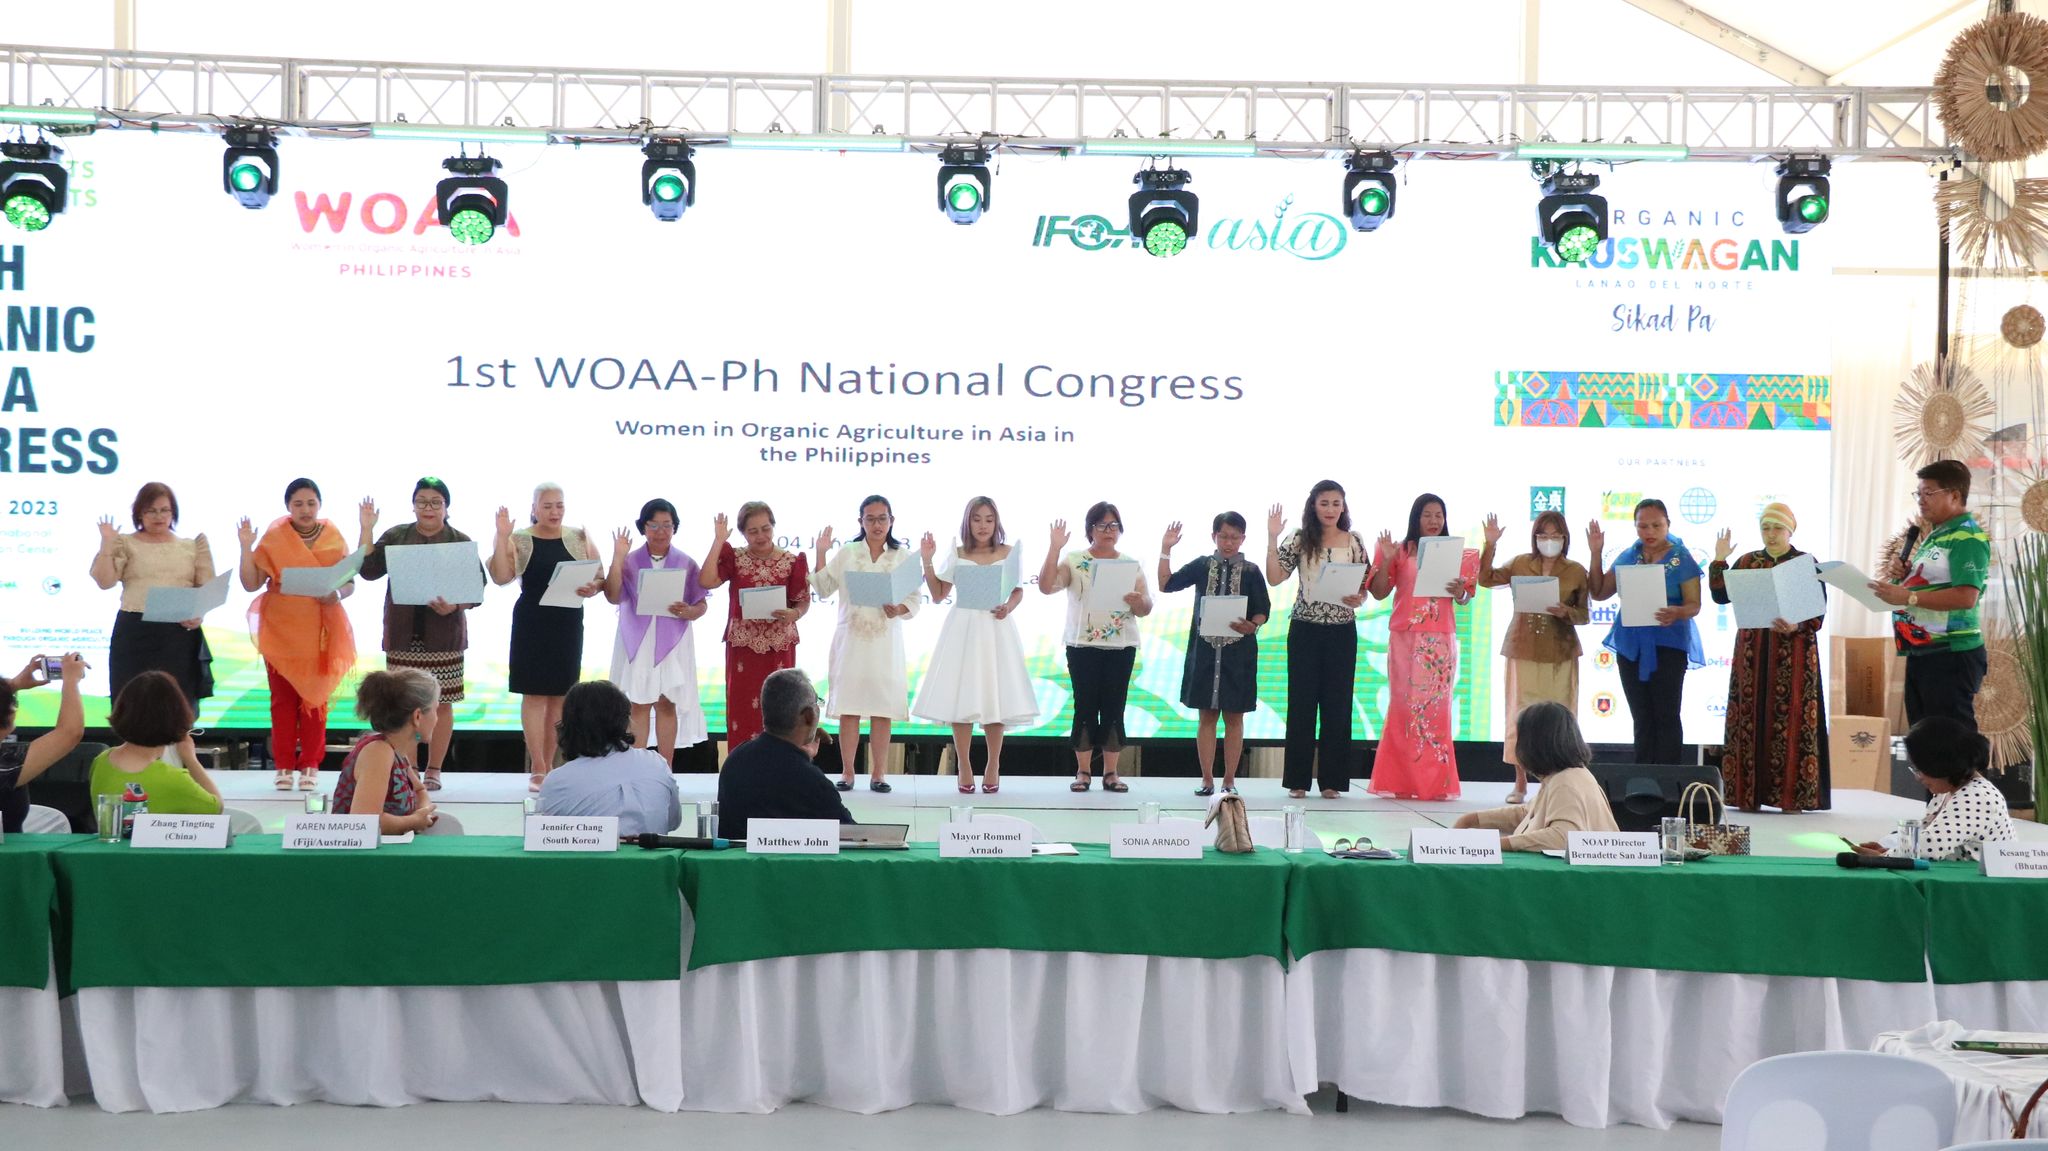 DA-10 joins Women on Organic Agriculture in Asia-Phl National Congress in Lanao Norte